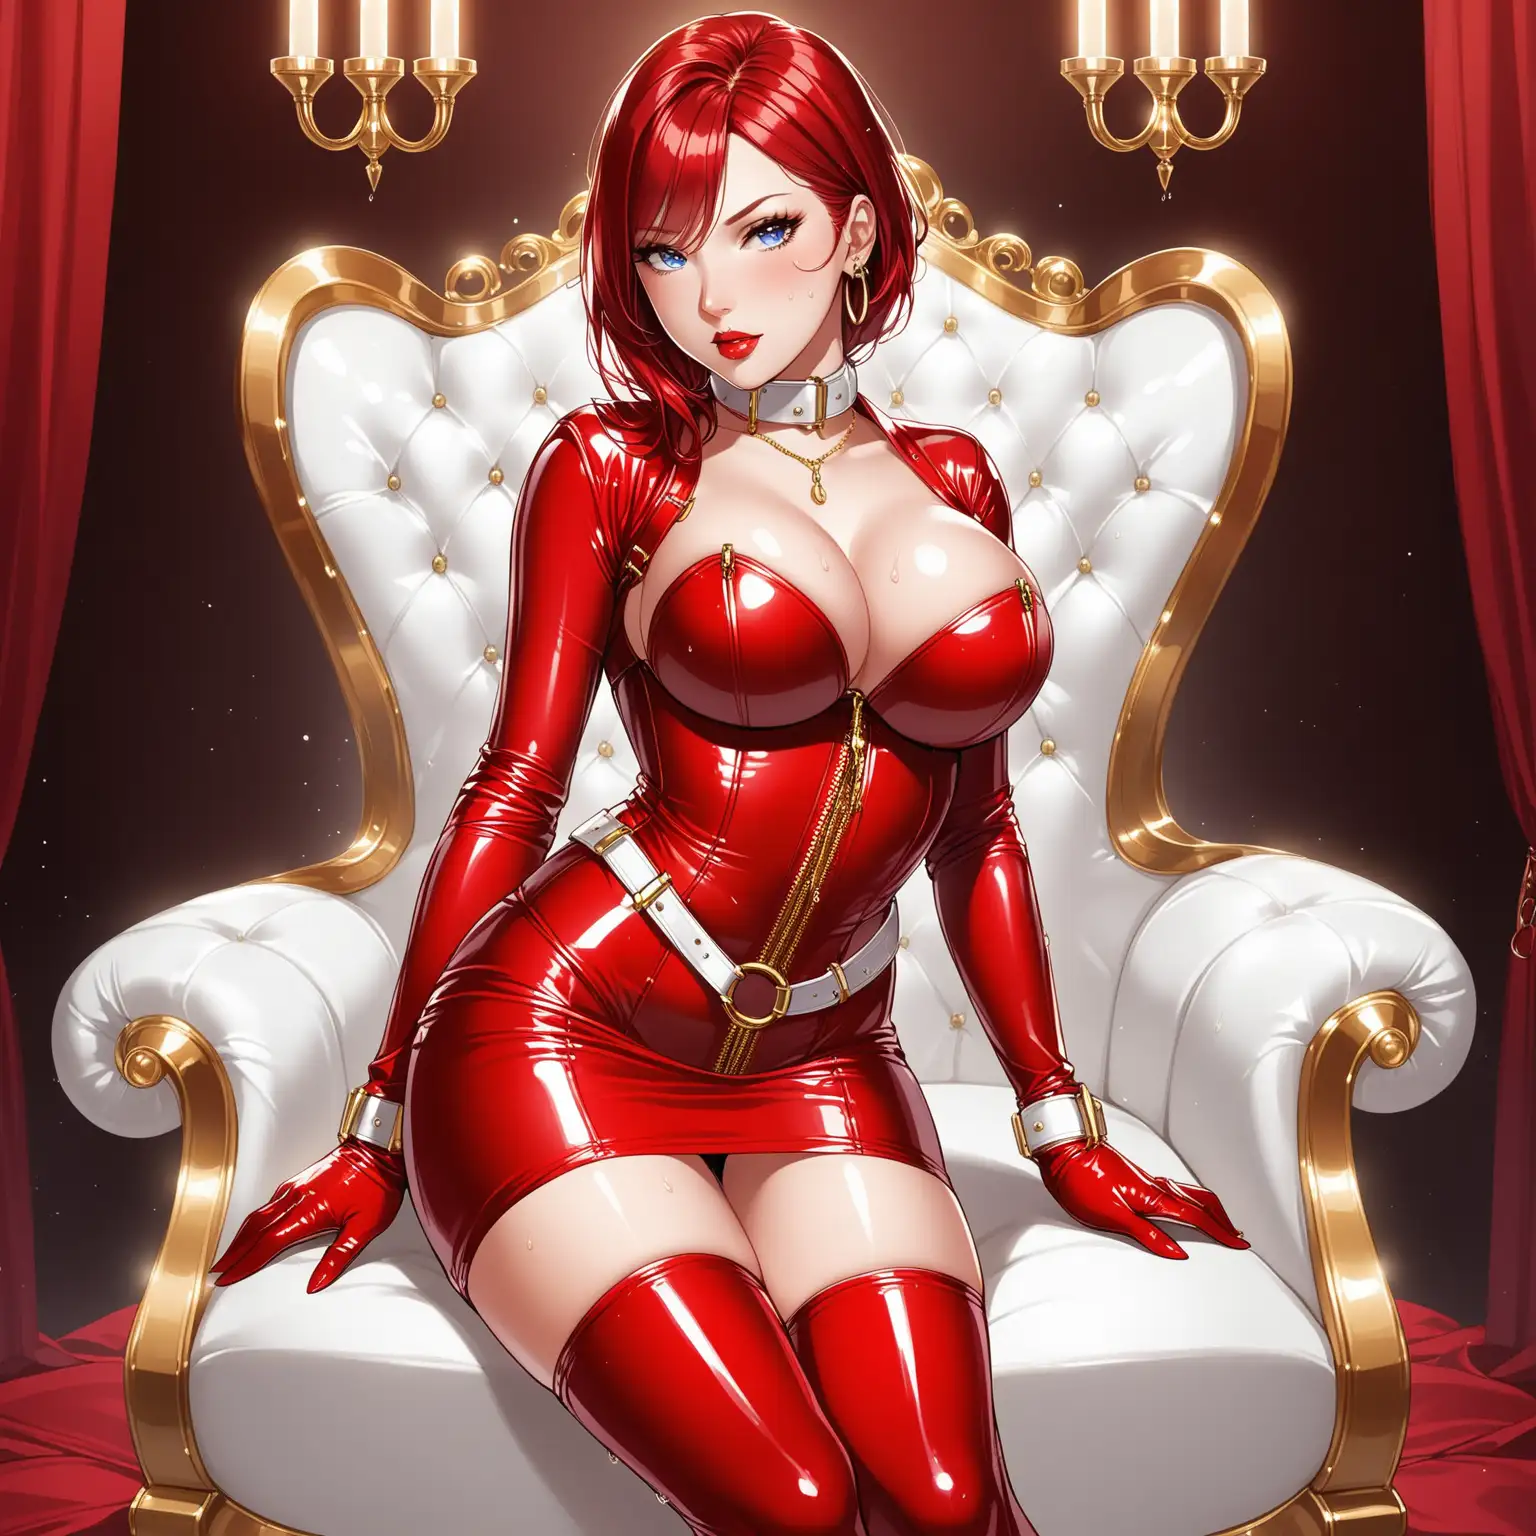 Mature Woman in Elegant Red Latex Corset and Bondage Accessories in Luxurious Mansion